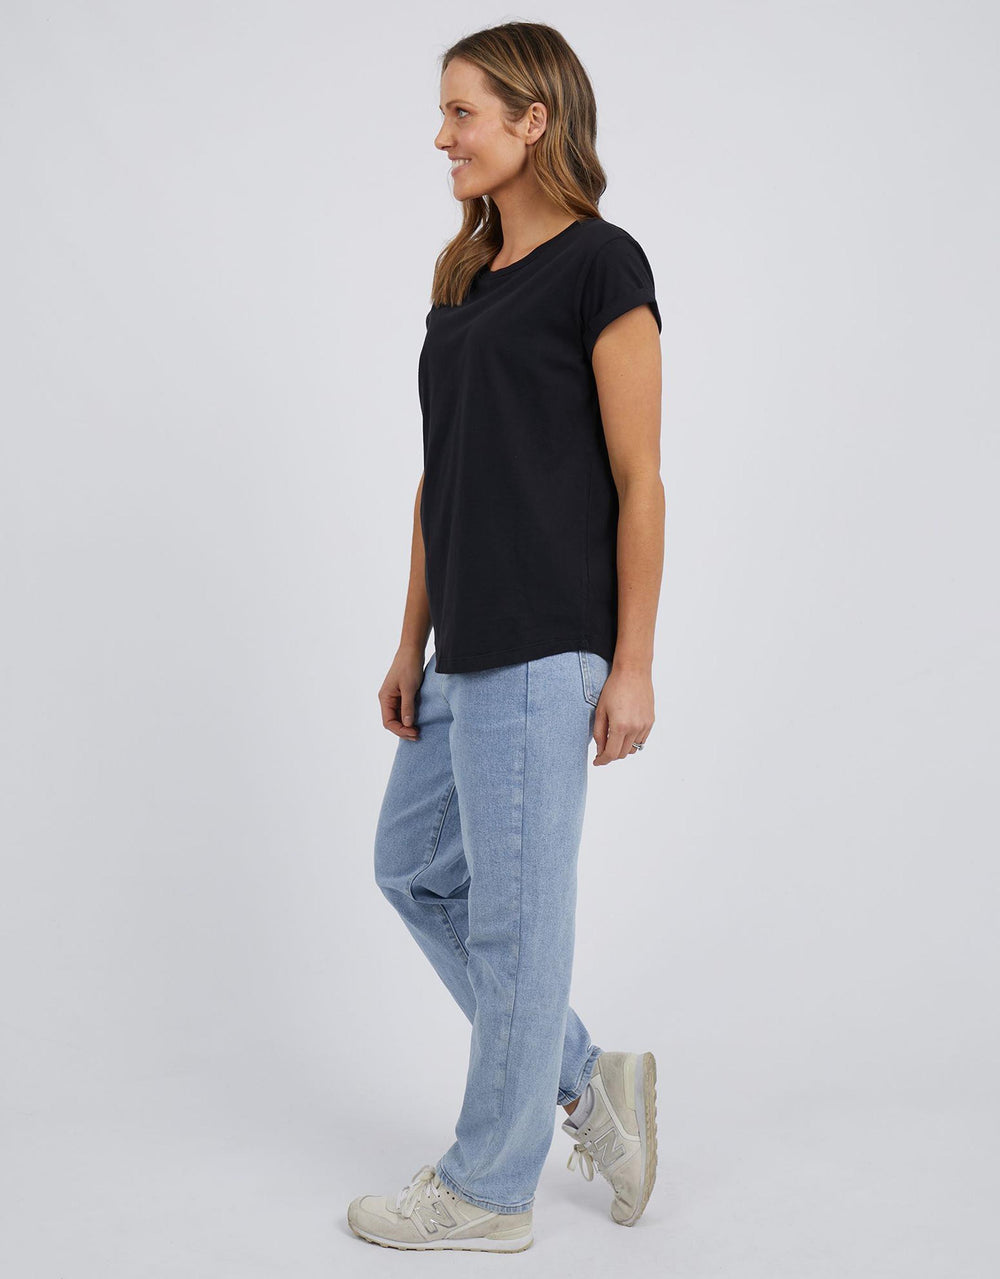 Foxwood - Manly Tee - Black - White & Co Living Tops